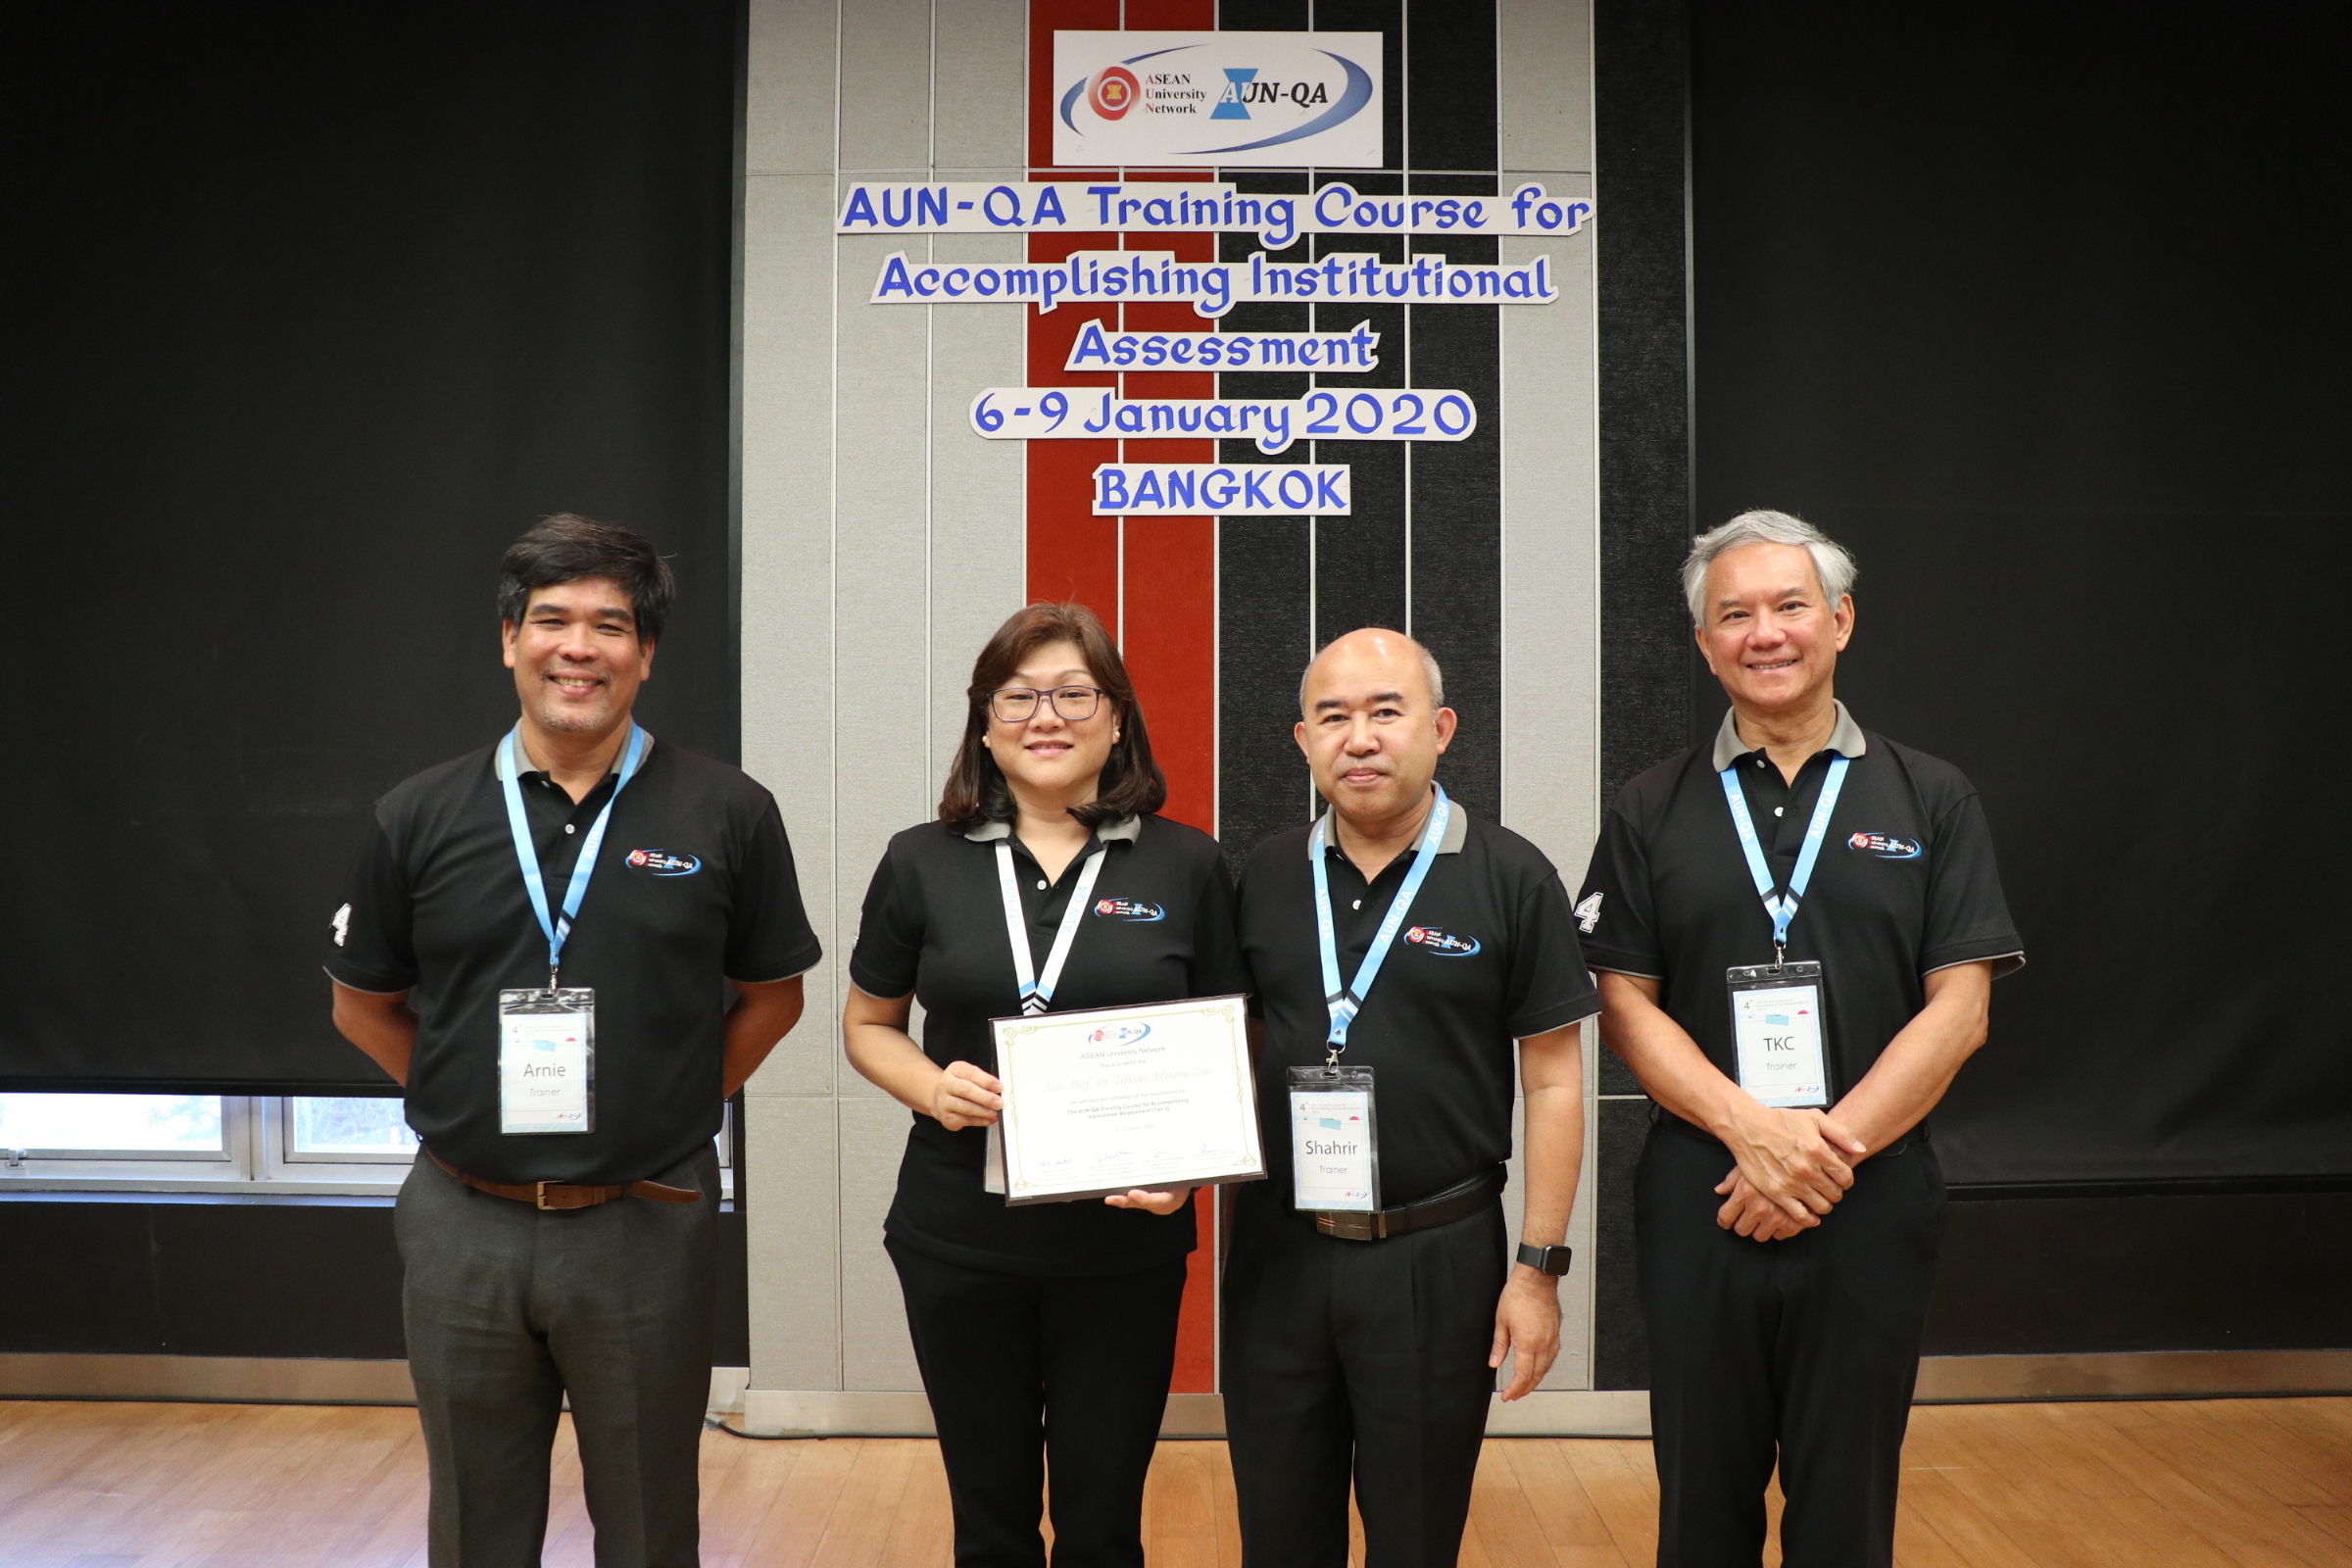 SoM Dean Tiffany Adelaine Tan, Ph.D. completed all requirements for the 4th AUN-QA Training Course for Accomplishing Institutional Assessment (Tier-3)